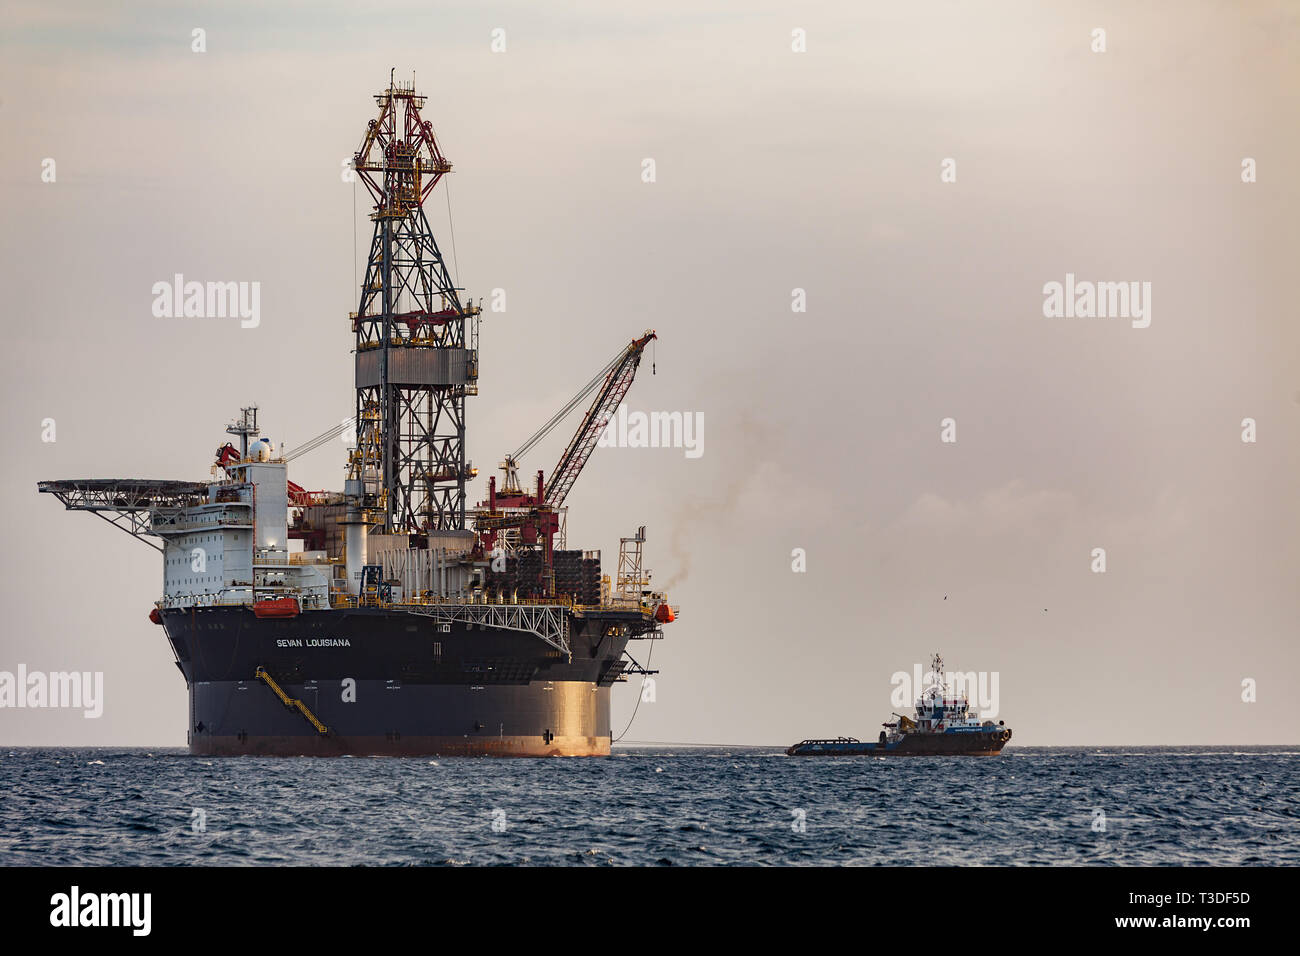 Curacao, Caribbean - April 02, 2014: The oil rig 'Sevan Louisiana' off the Curacao coast in the Caribbean. Mobile Offshore Drilling Unit (MODU) based  Stock Photo